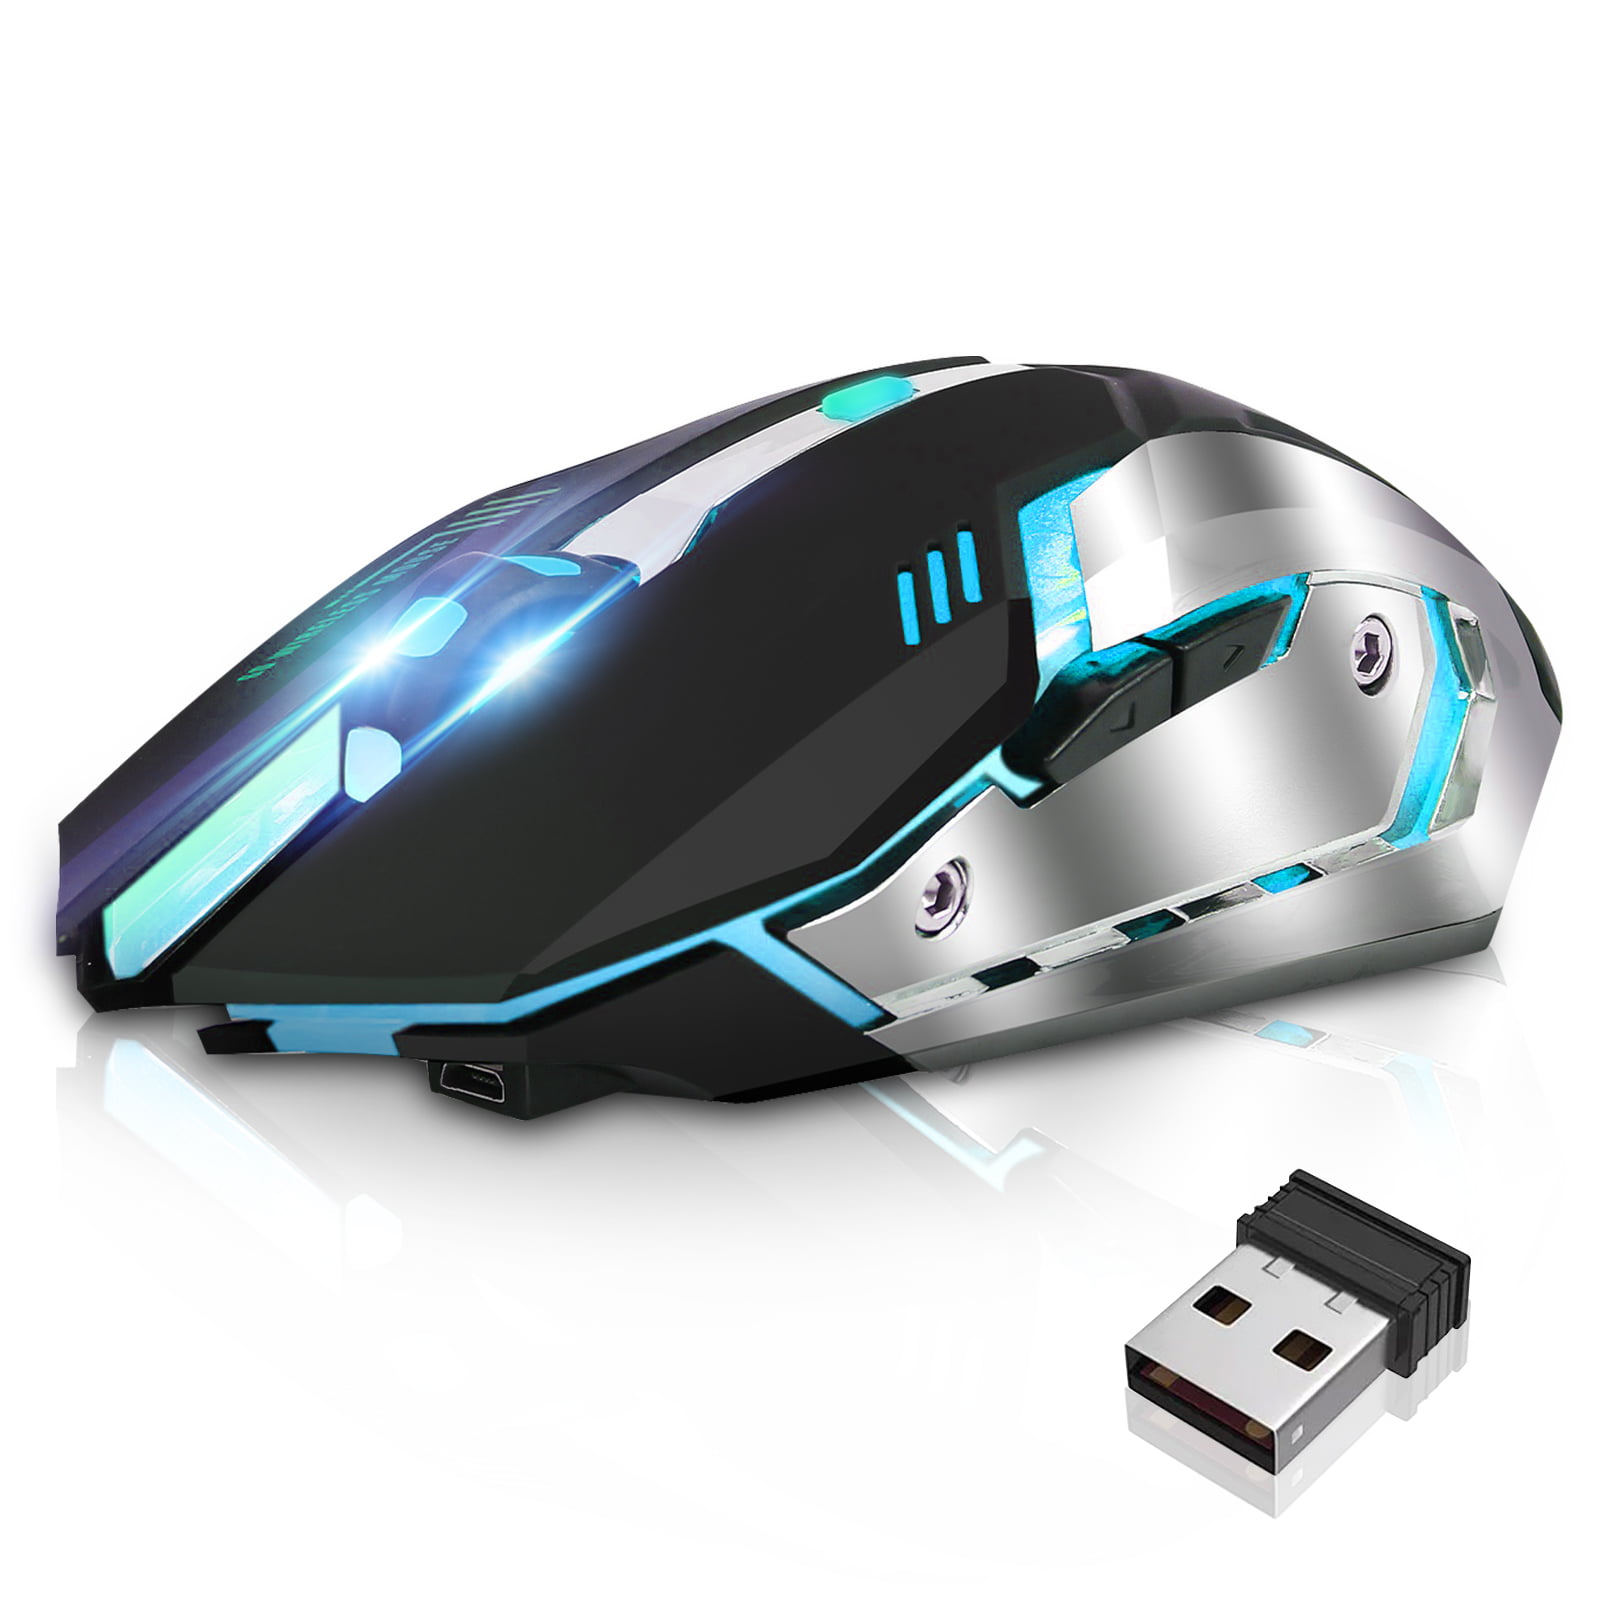 USB Wired 3 Button 2400DPI Optical Mice Gaming Mouse with Colorful LED Backlight 